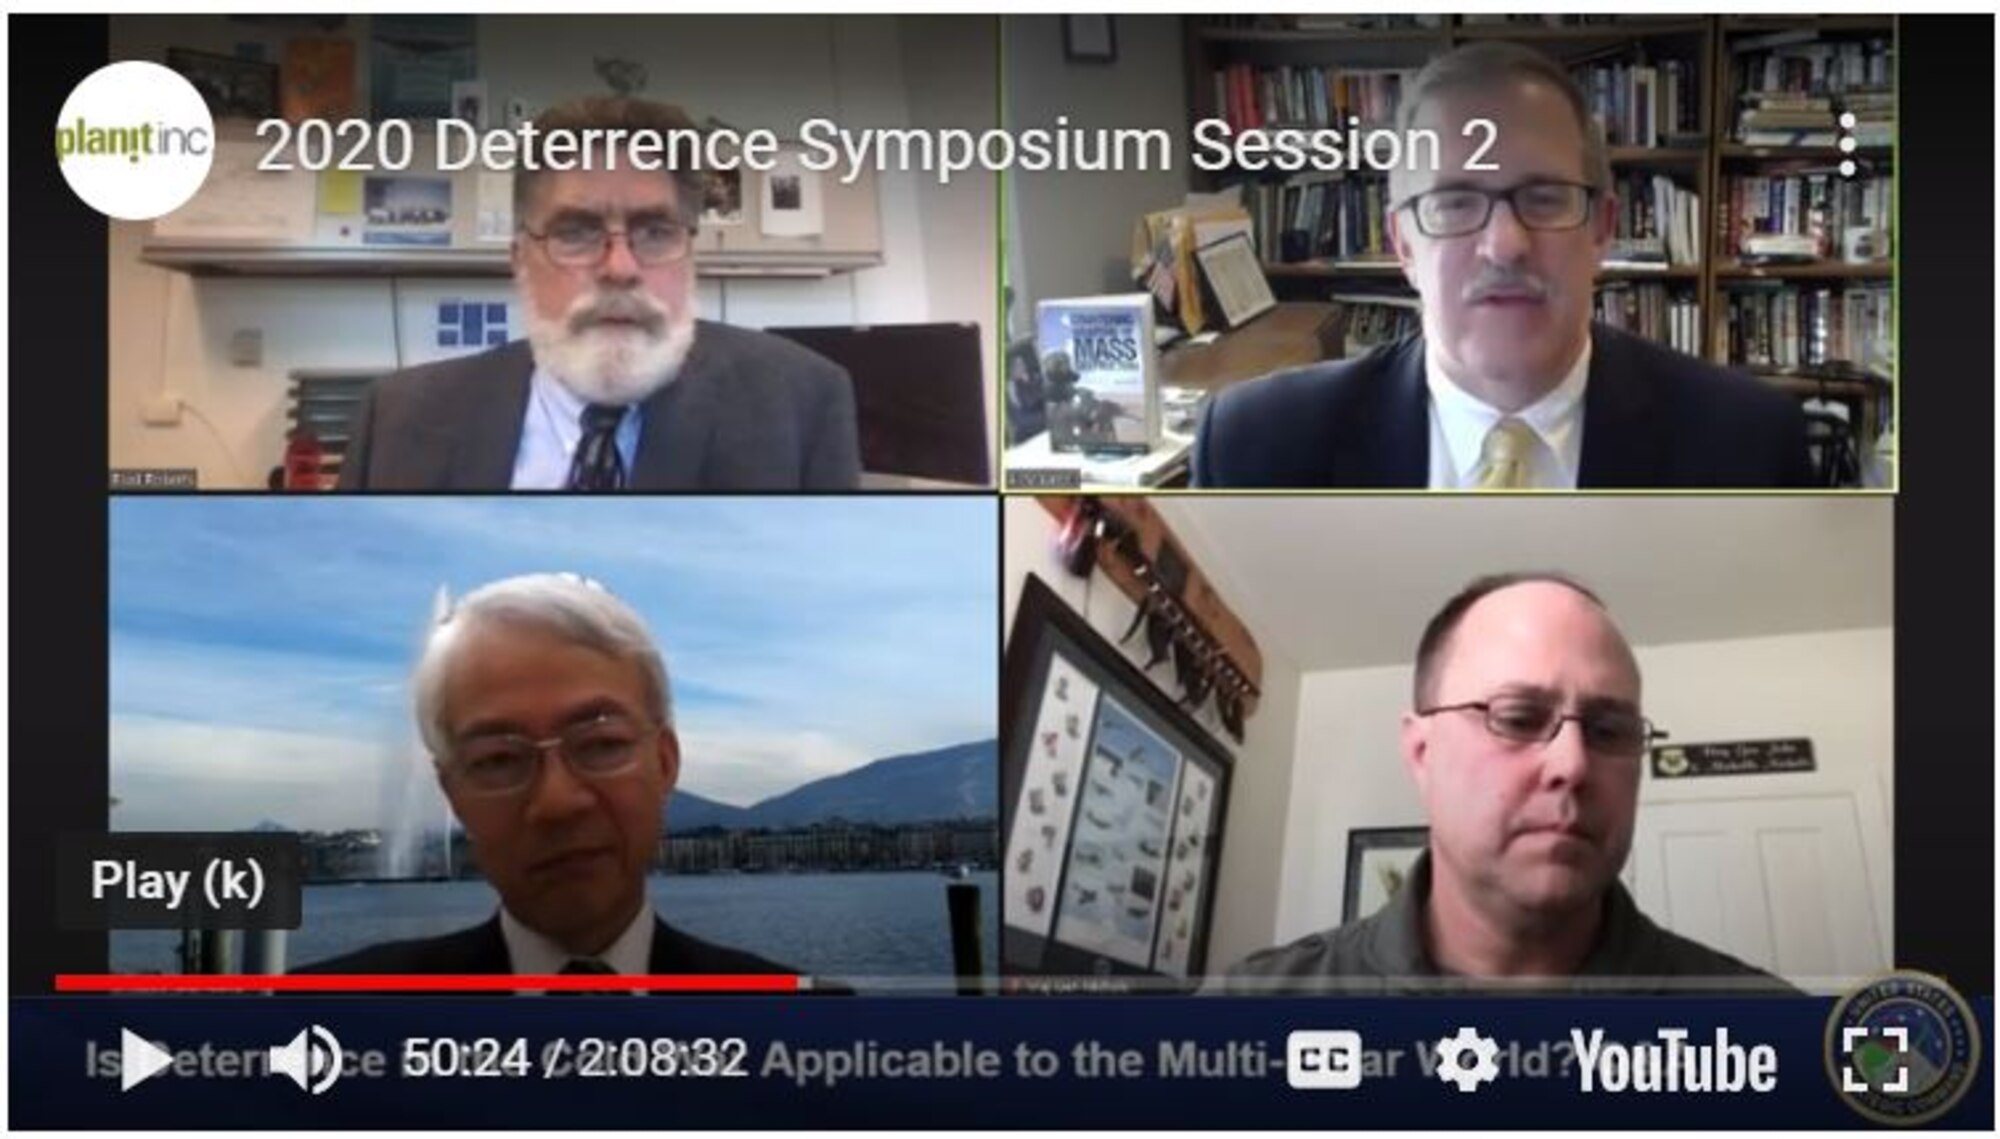 Al Mauroni (top right), director of the Air Force Center for Strategic Deterrence Studies at Air University, provided his perspective on deterrence education during the U.S. Strategic Command Deterrence Symposium held virtually in November. Mauroni took part in the session titled “Is Deterrence in the Cold War Applicable to the Multi-polar World.”